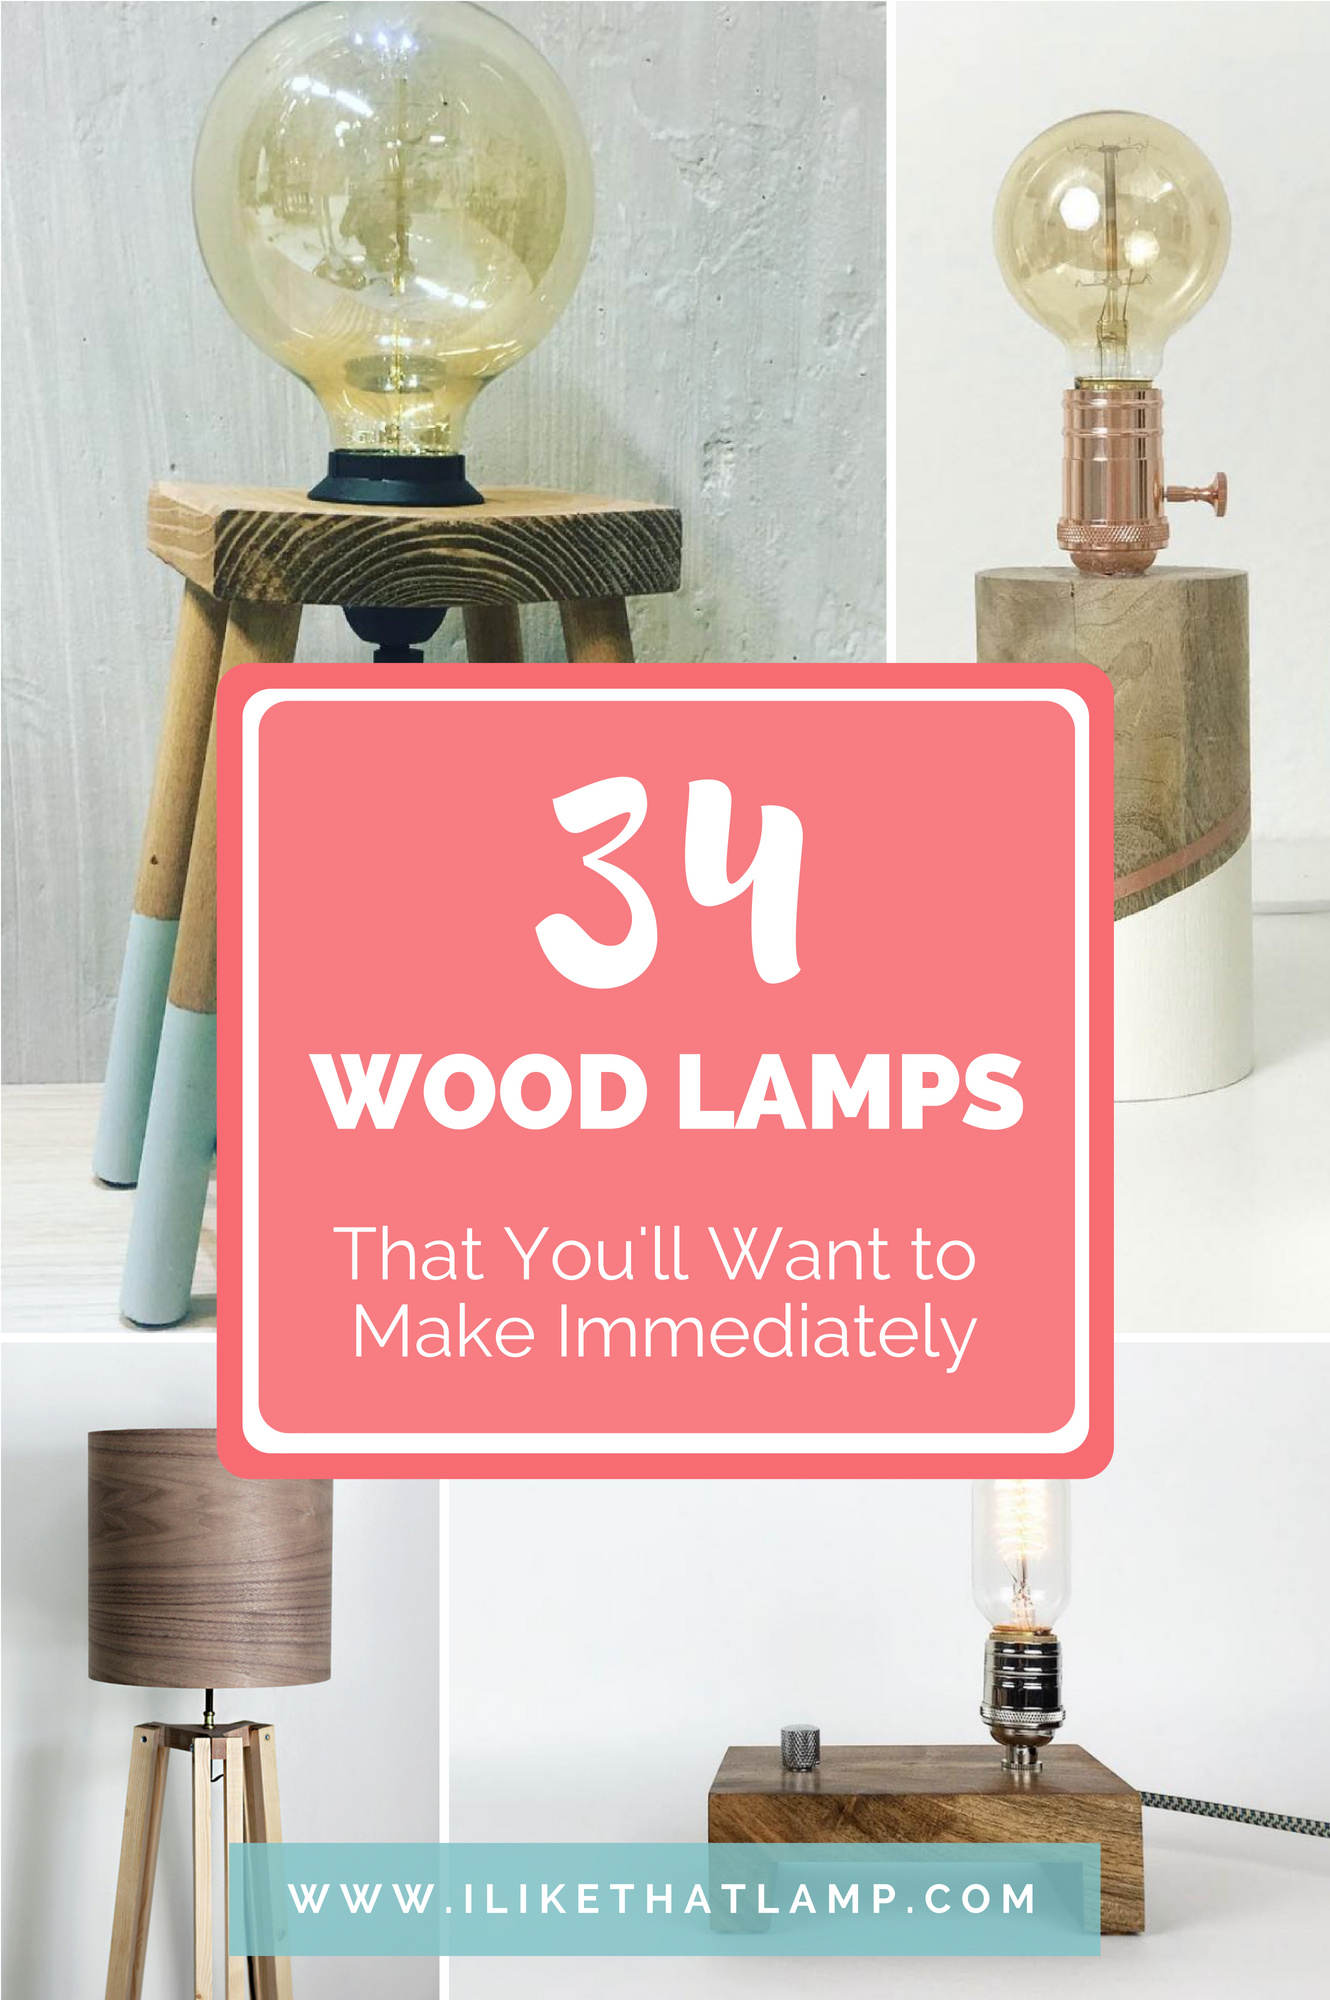 34 Wood Lamps Youll Want to DIY Immediately